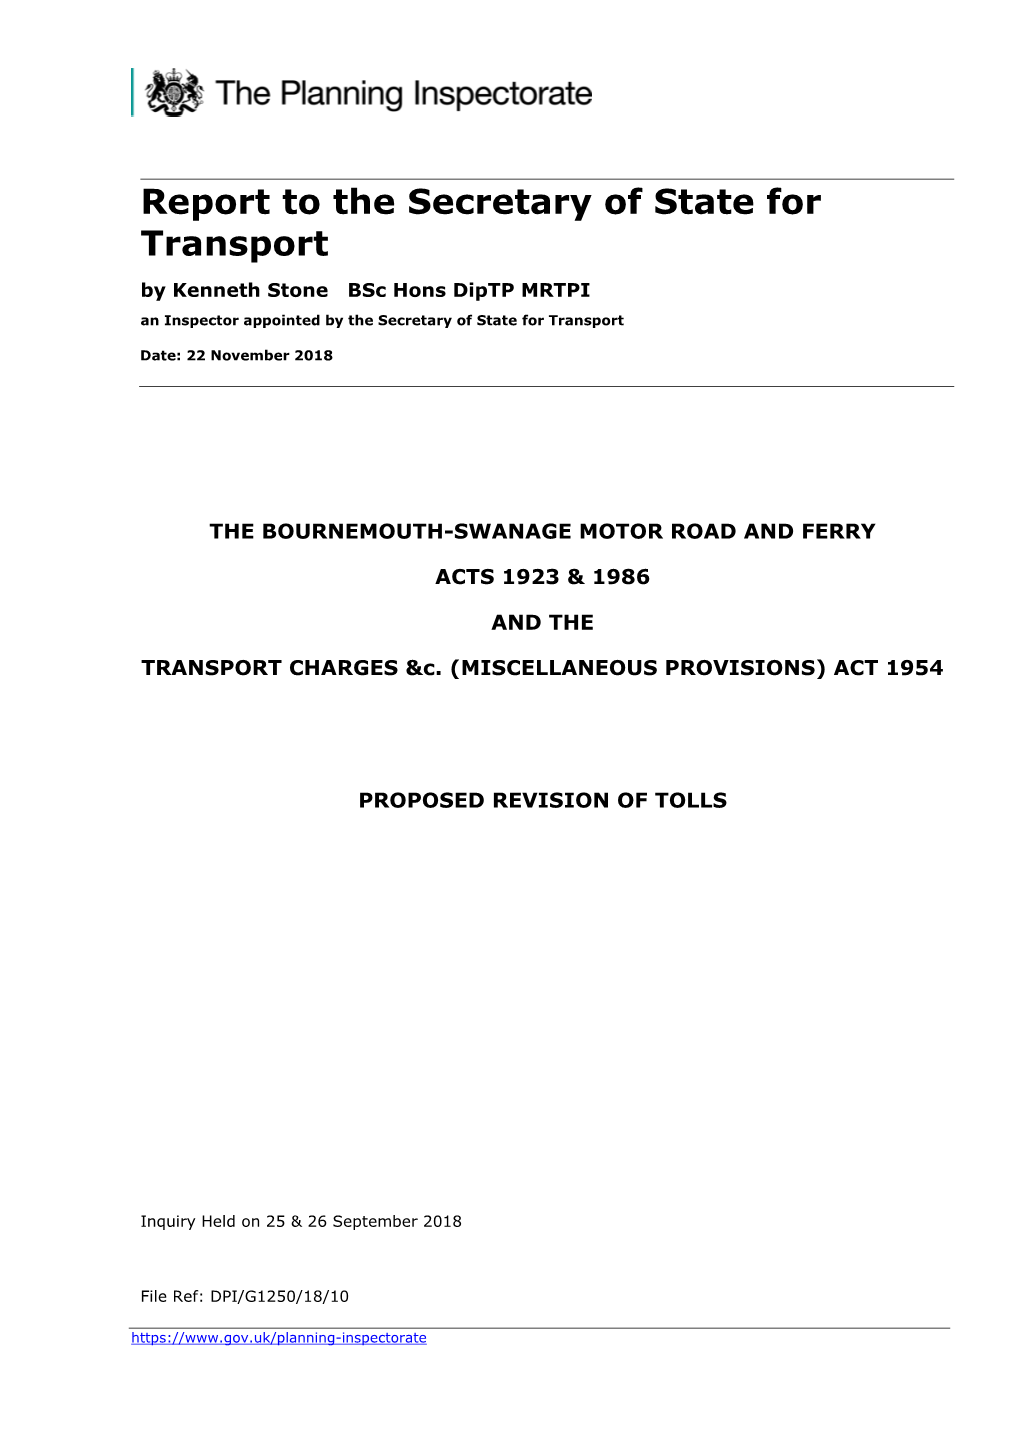 Report to the Secretary of State for Transport